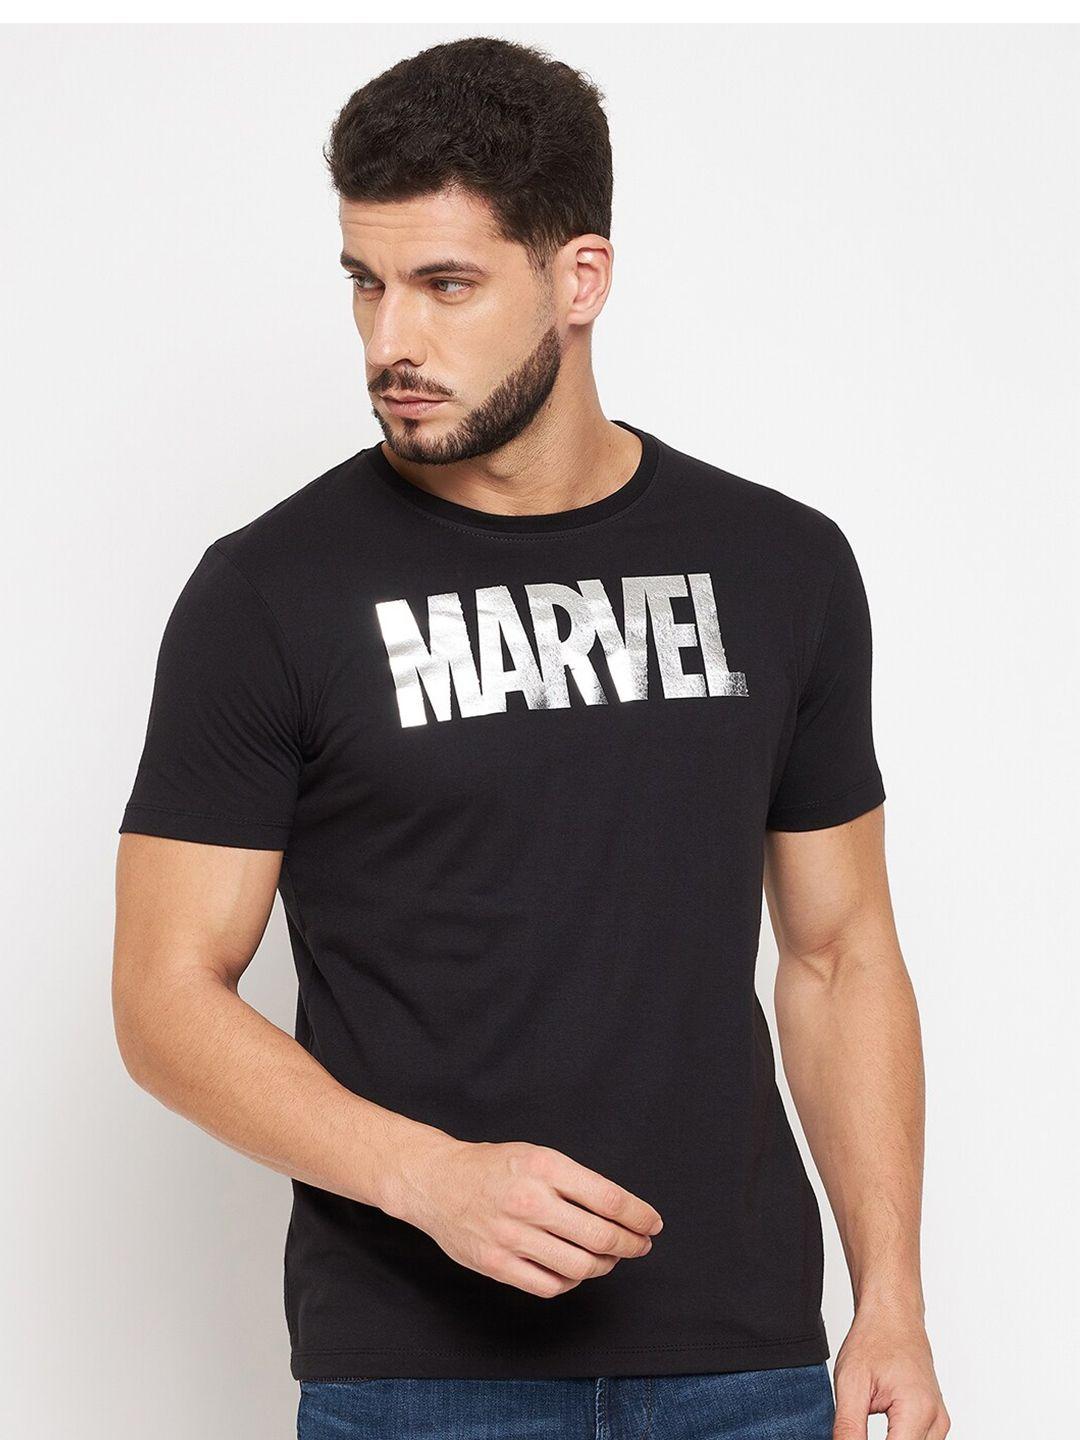 marvel by wear your mind men typography printed pure cotton t-shirt